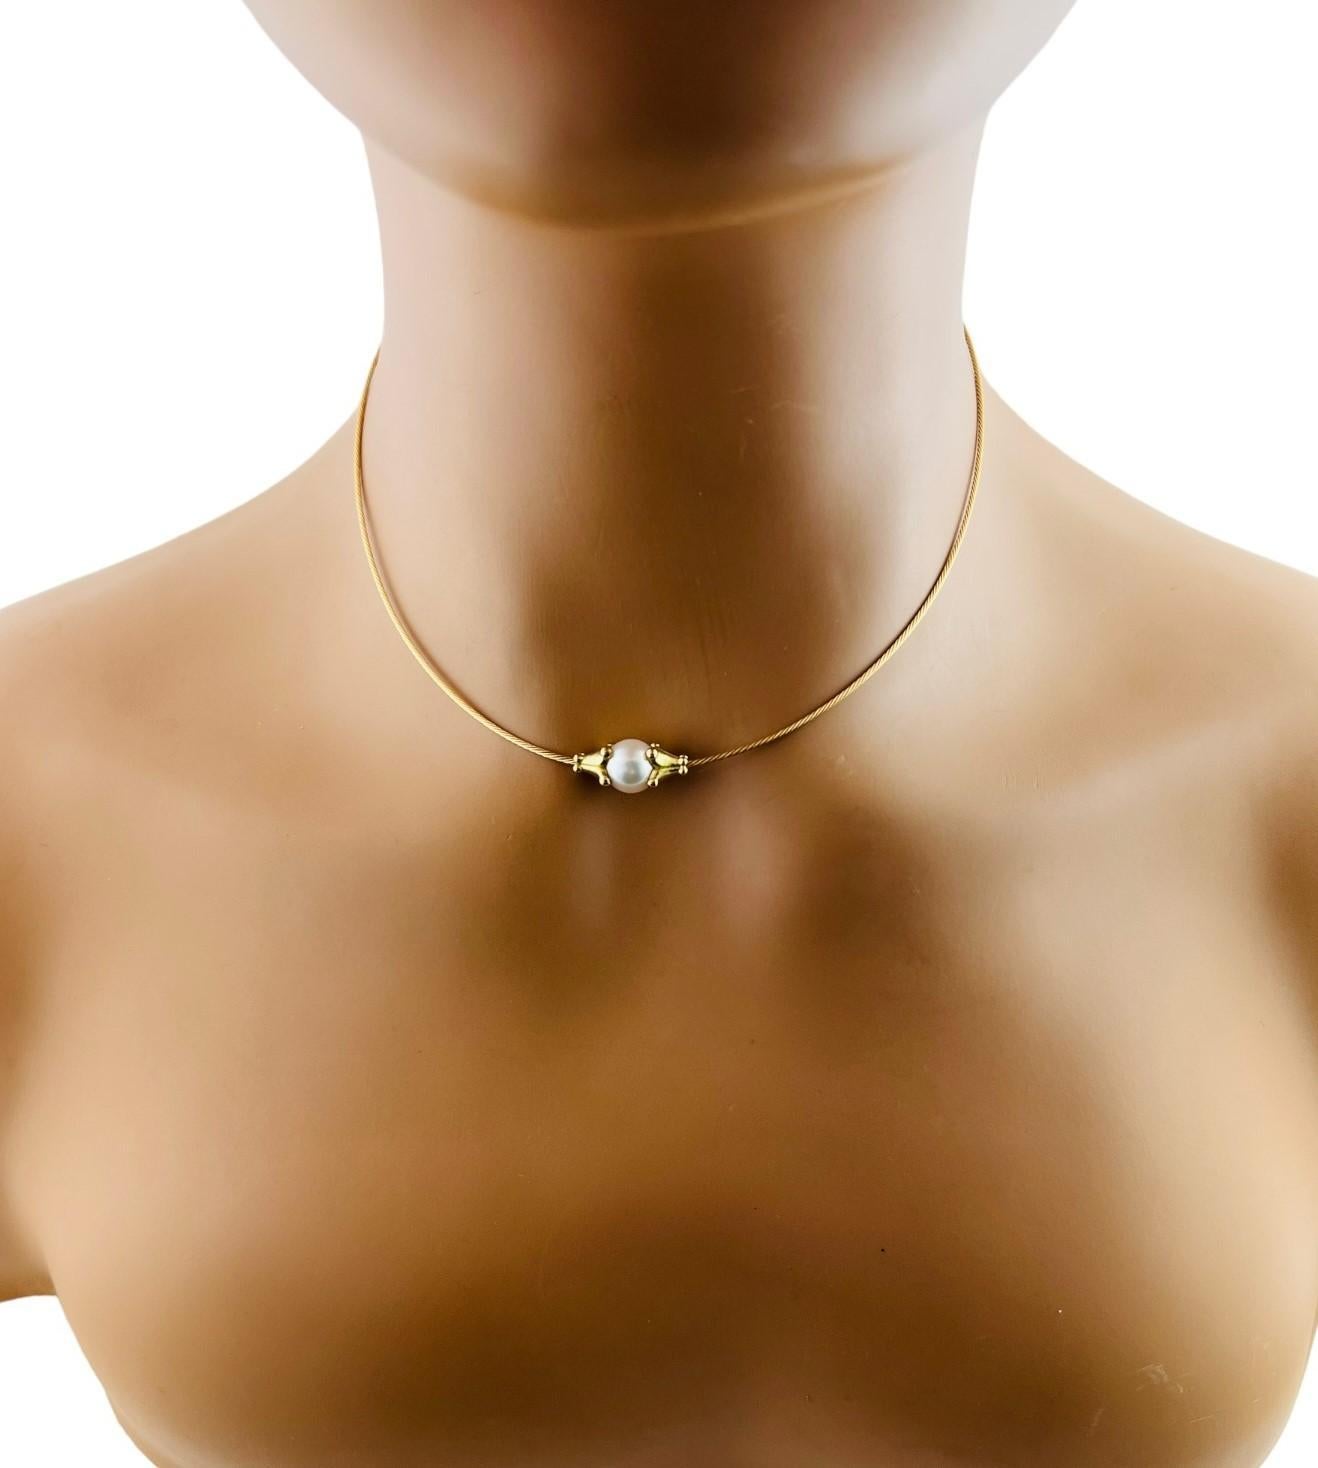 Paul Morelli 18 Karat Yellow Gold and Pearl Necklace #16748 For Sale 4